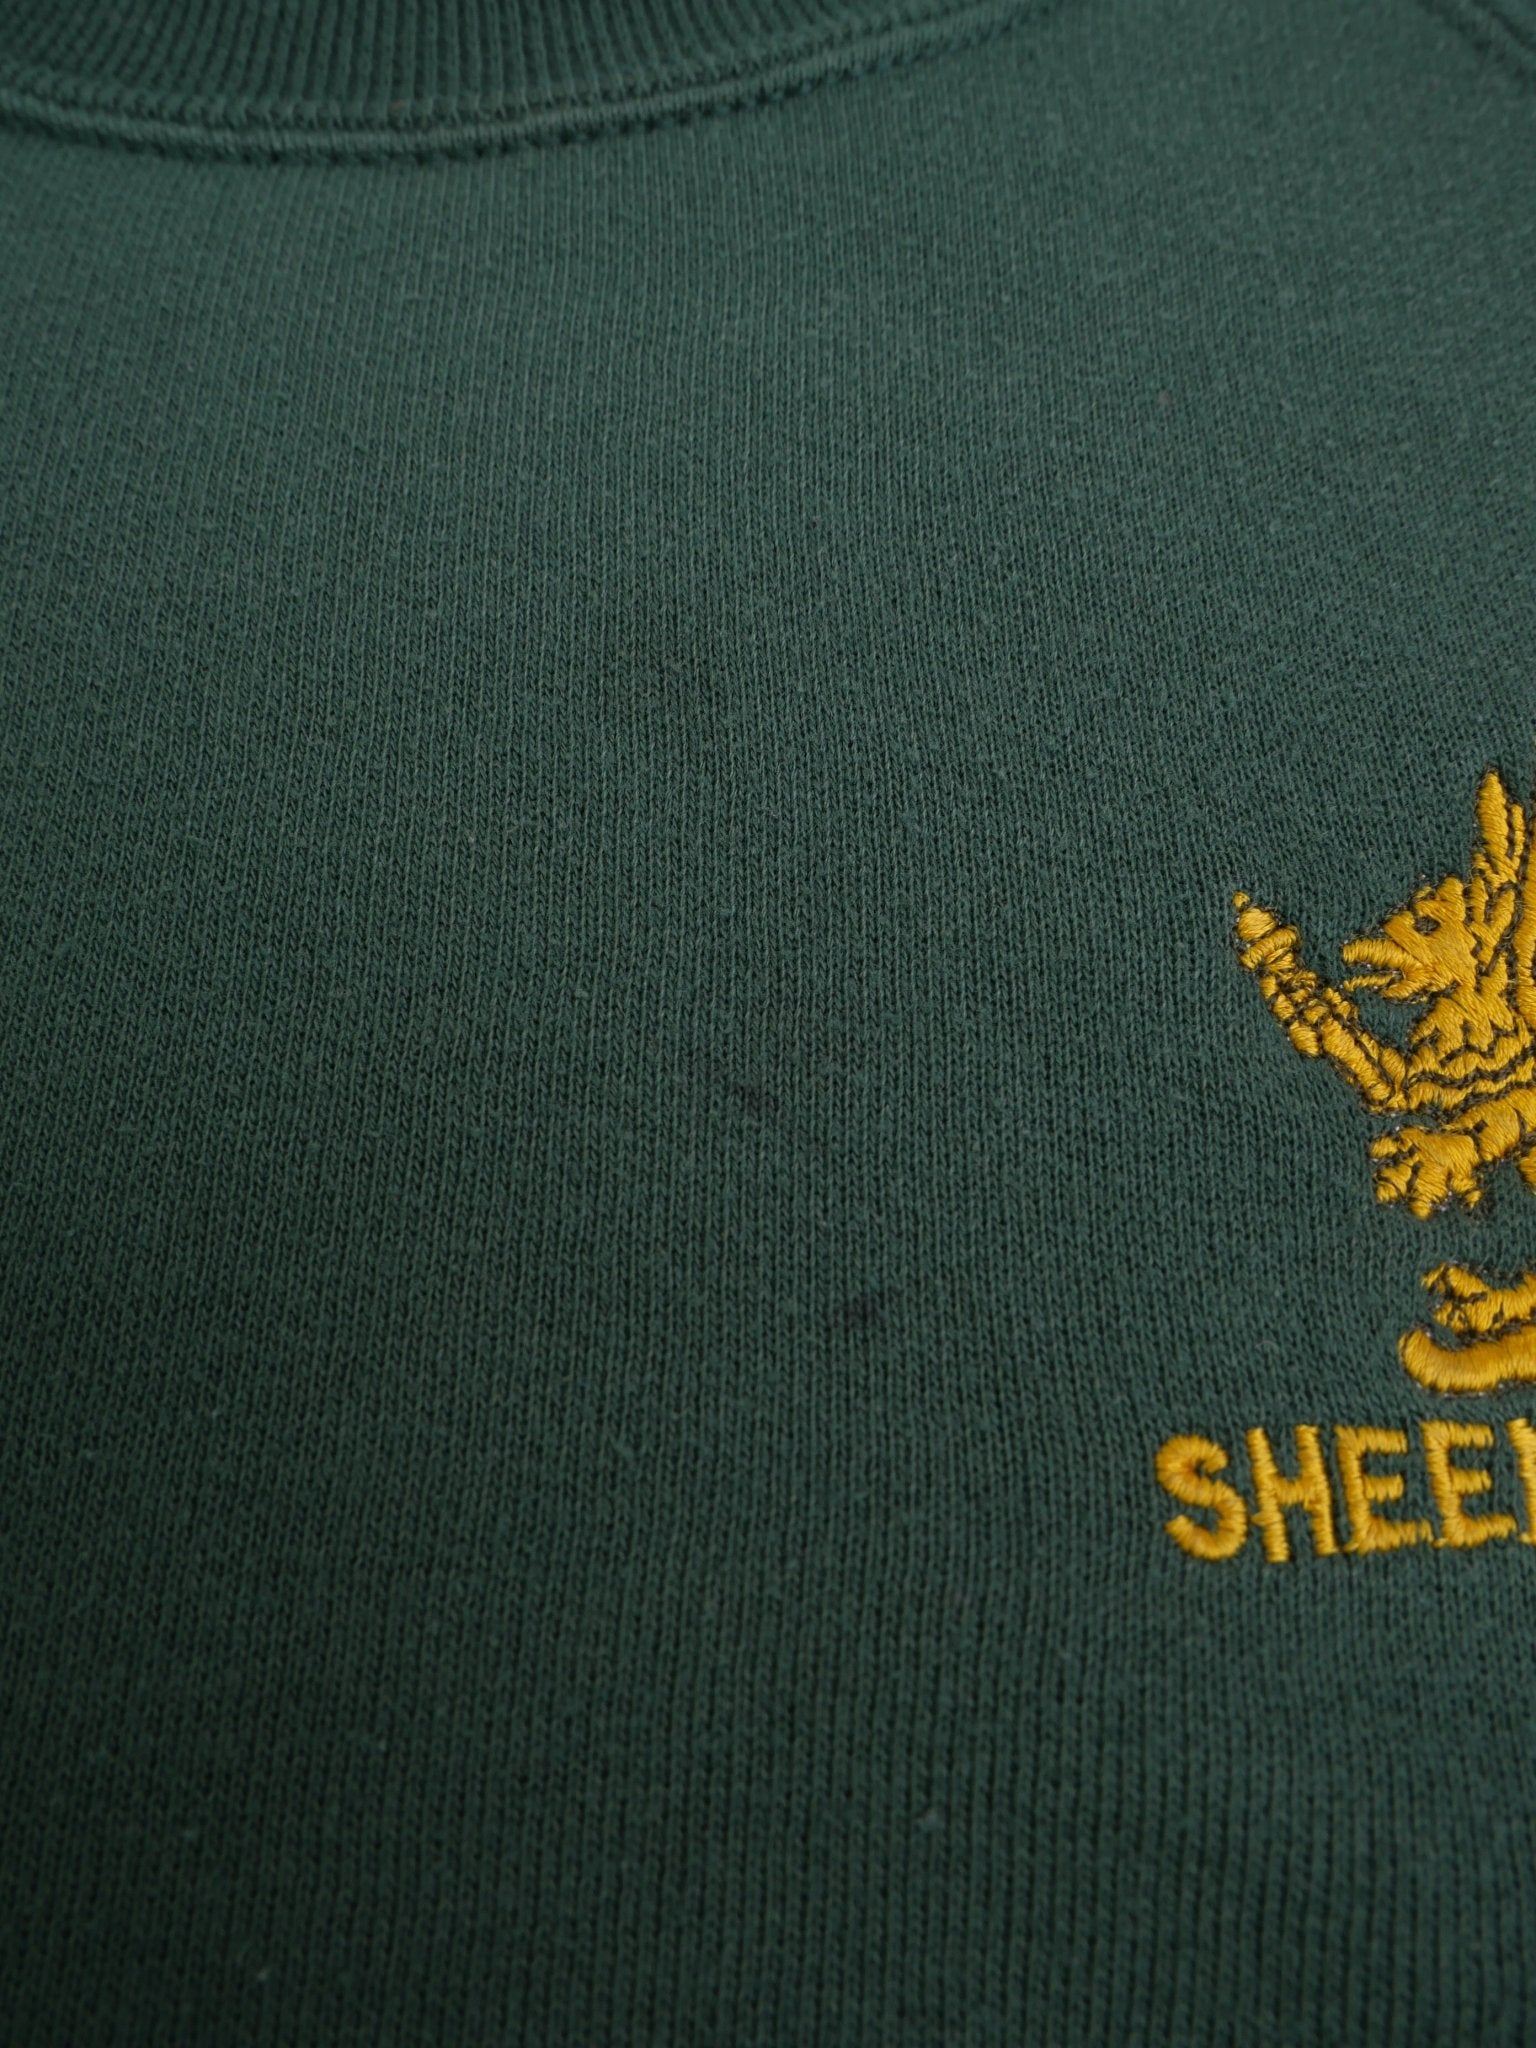 Russell Athletic Sheen Mount embroidered Logo Vintage Sweater - Peeces